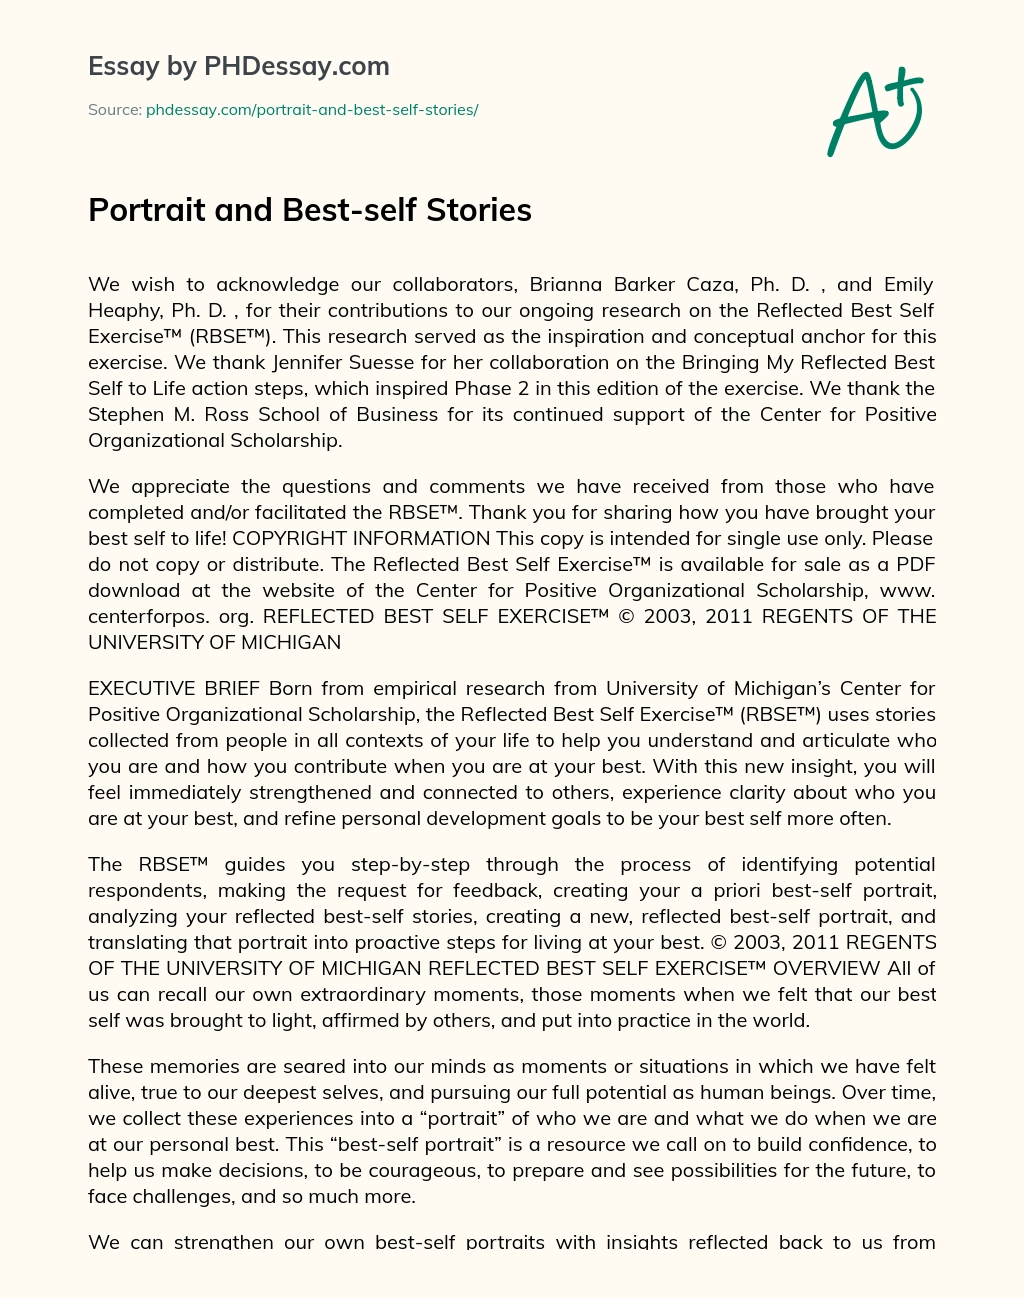 Portrait and Best-self Stories essay